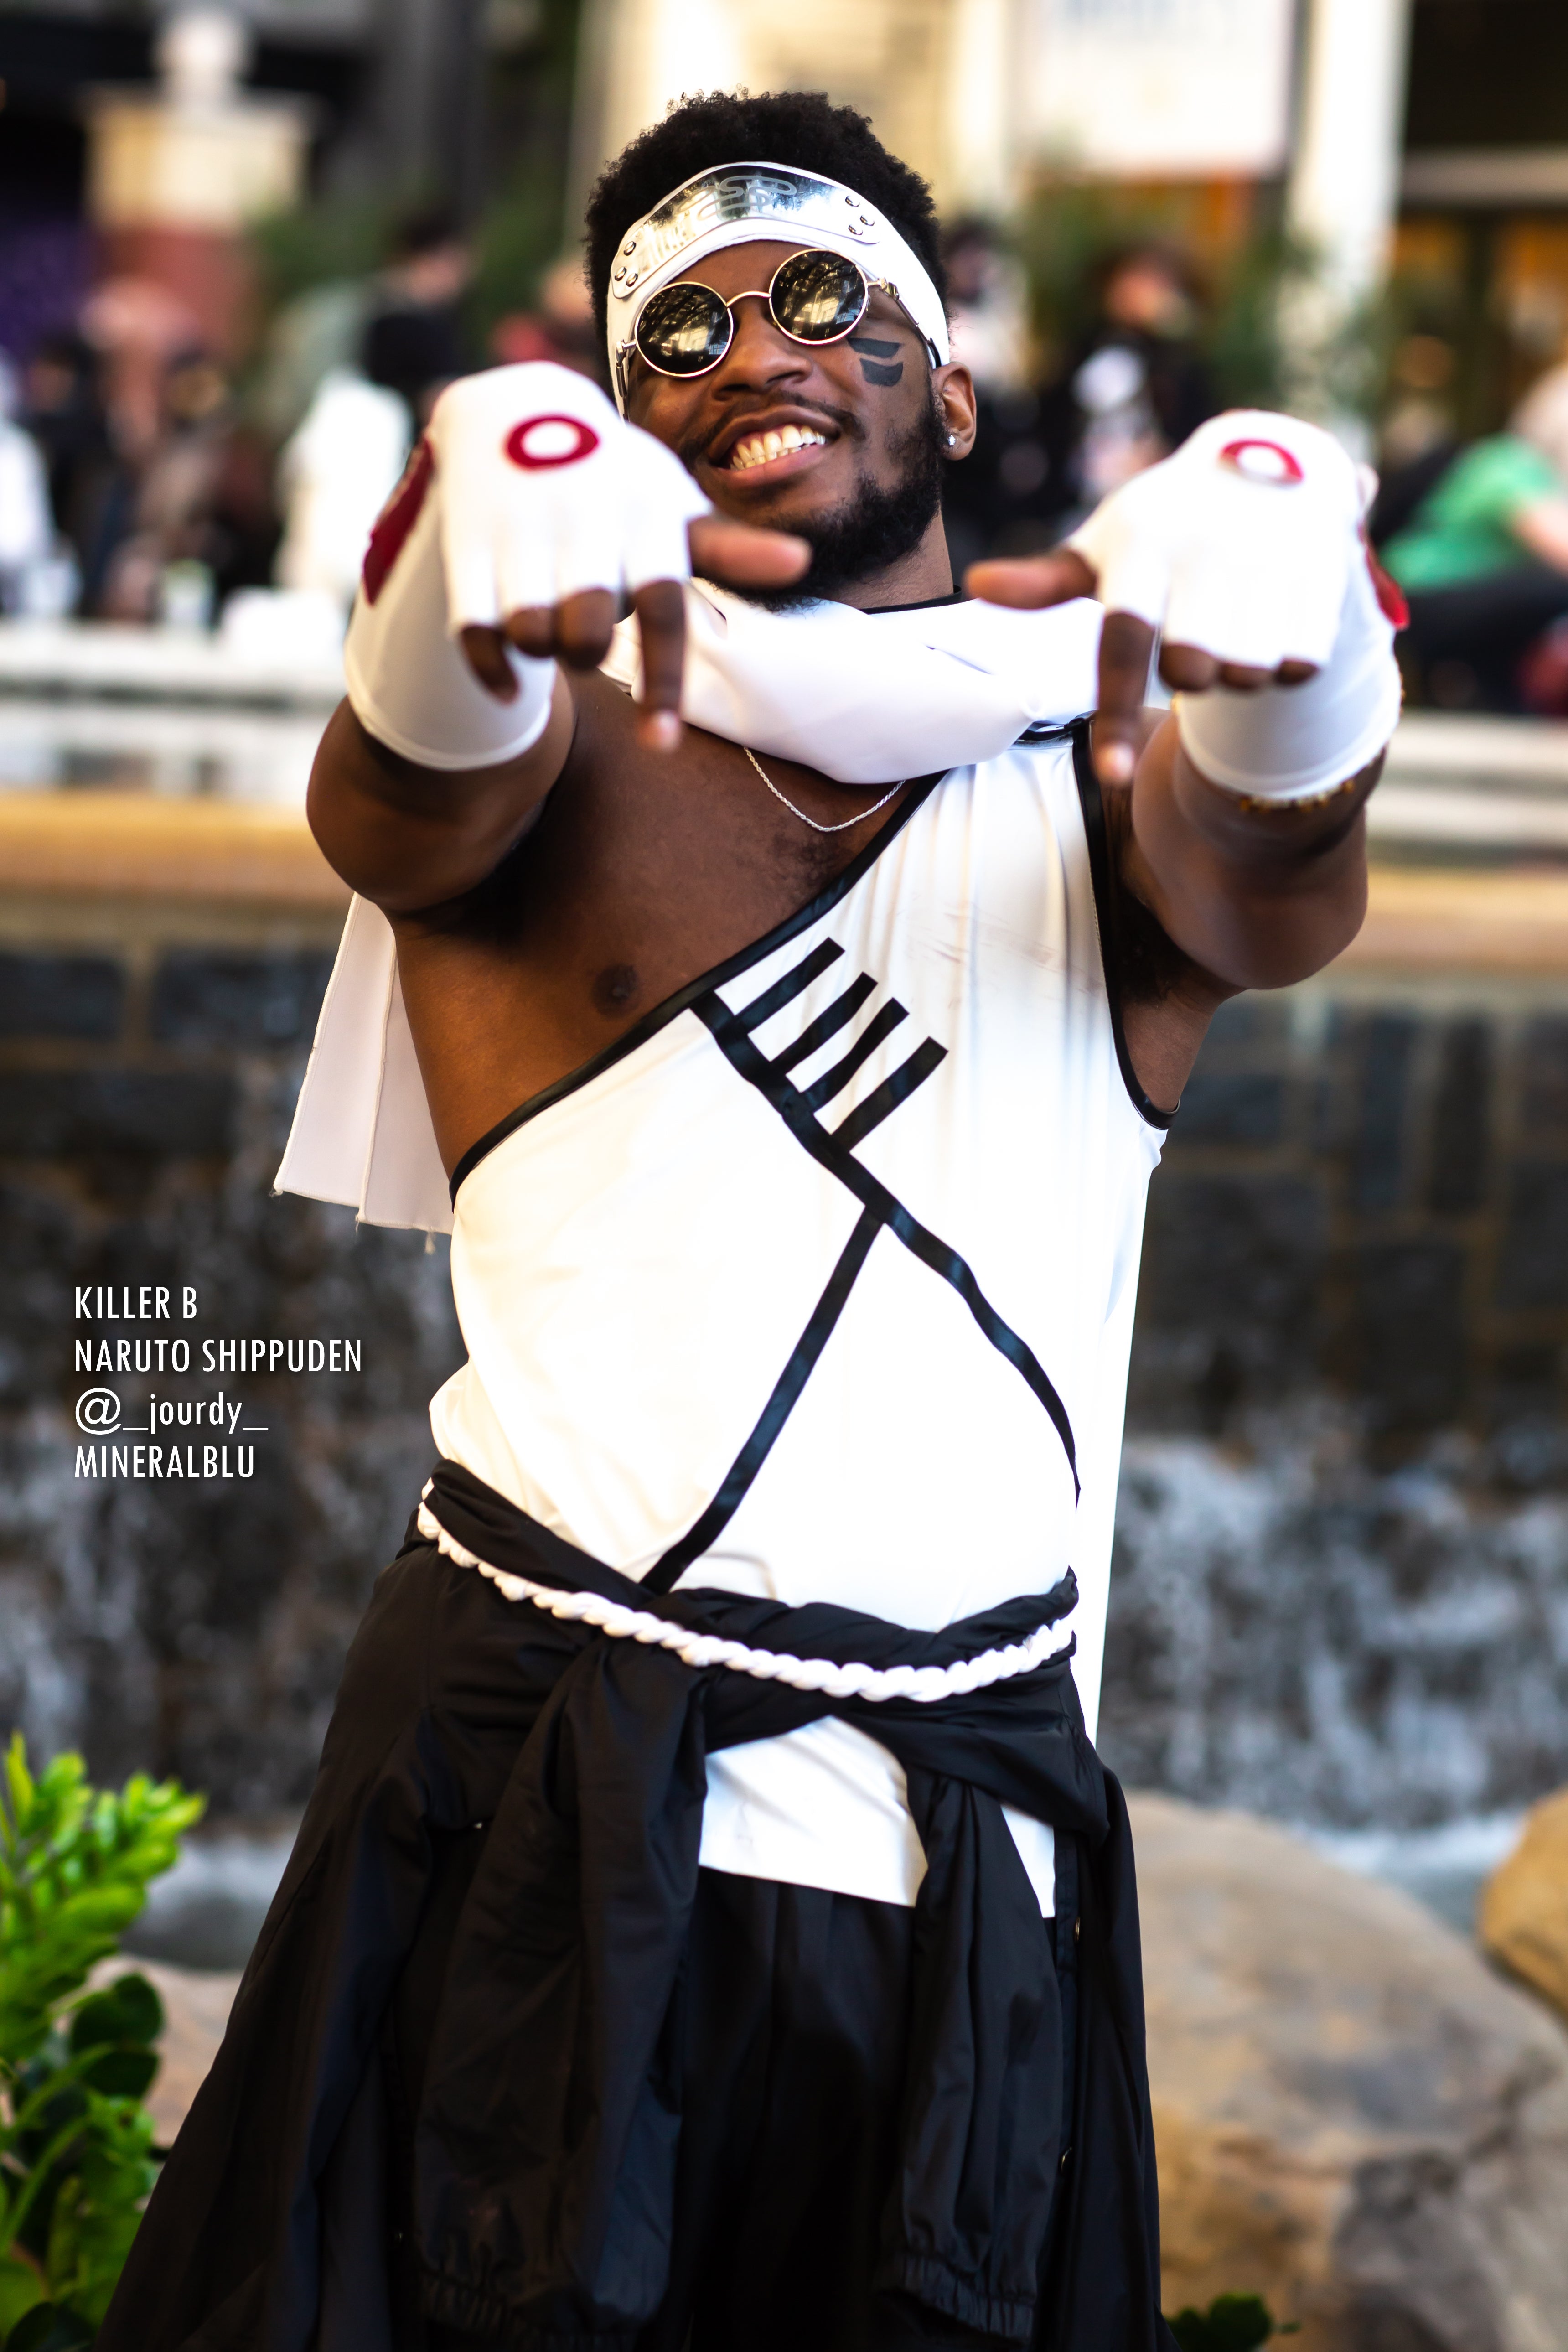 Our Favourite Cosplay From Katsucon 2022